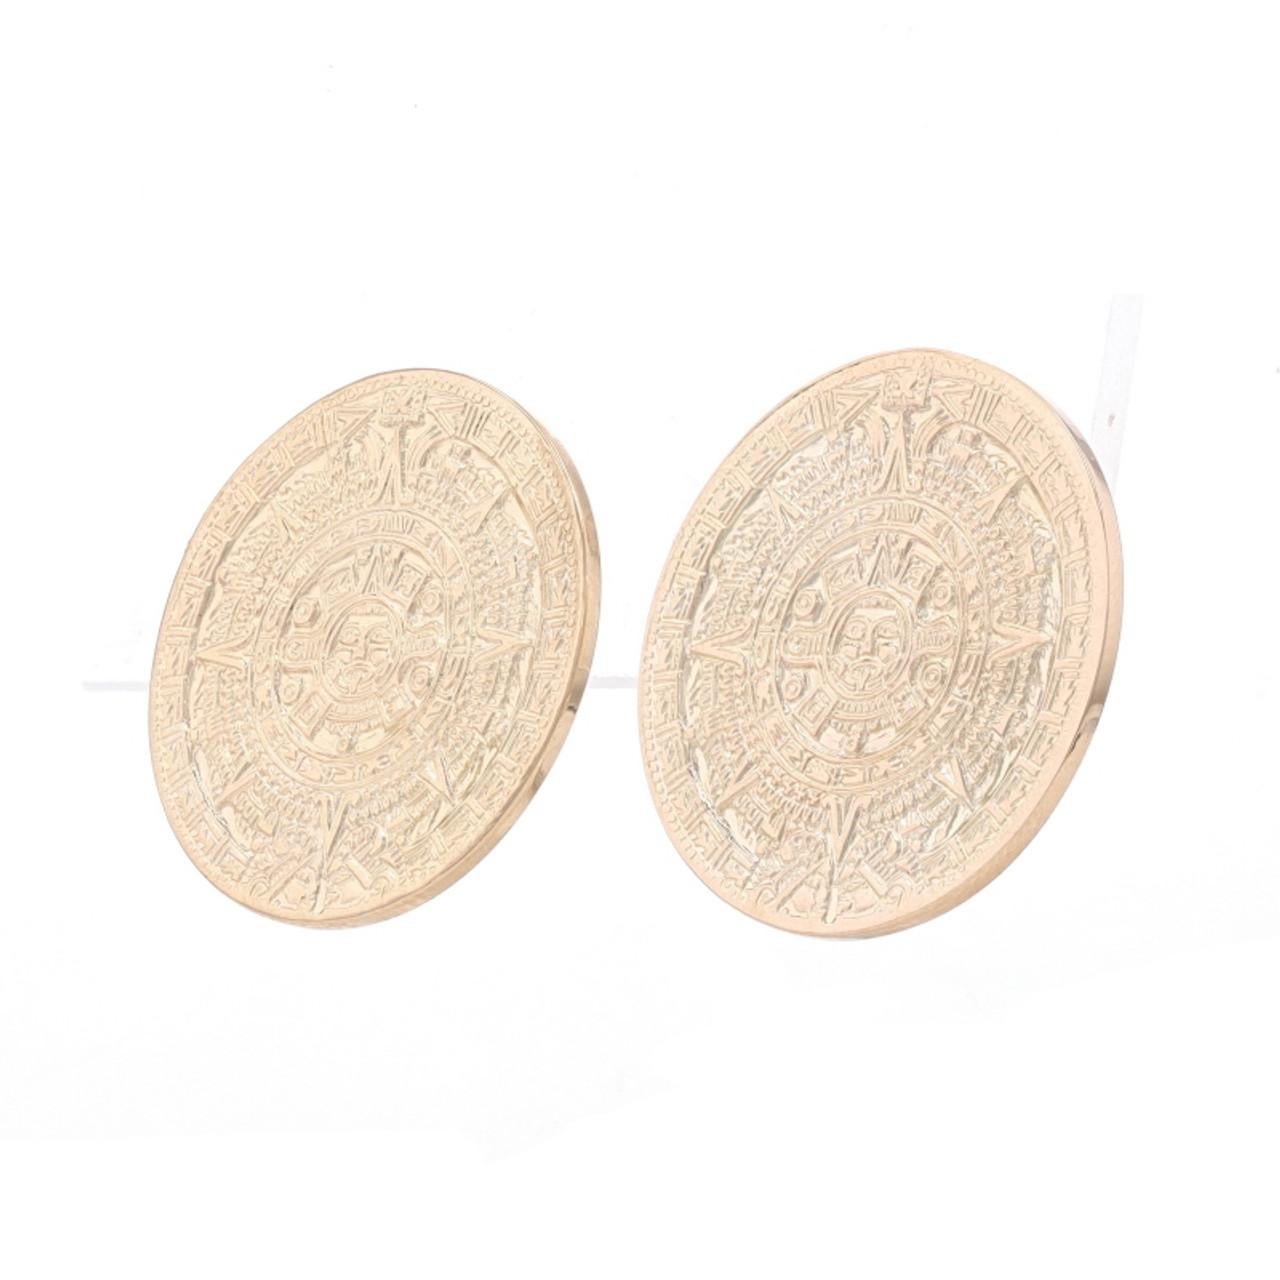 Yellow Gold Aztec Calendar Large Stud Earrings 14k Ancient Mesoamerica Clip-Ons

Additional information:
Material: Metal 14k Yellow Gold
Style: Large Stud
Fastening Type: Non-Pierced Clip-On Closures
Theme: Aztec Calendar, Ancient